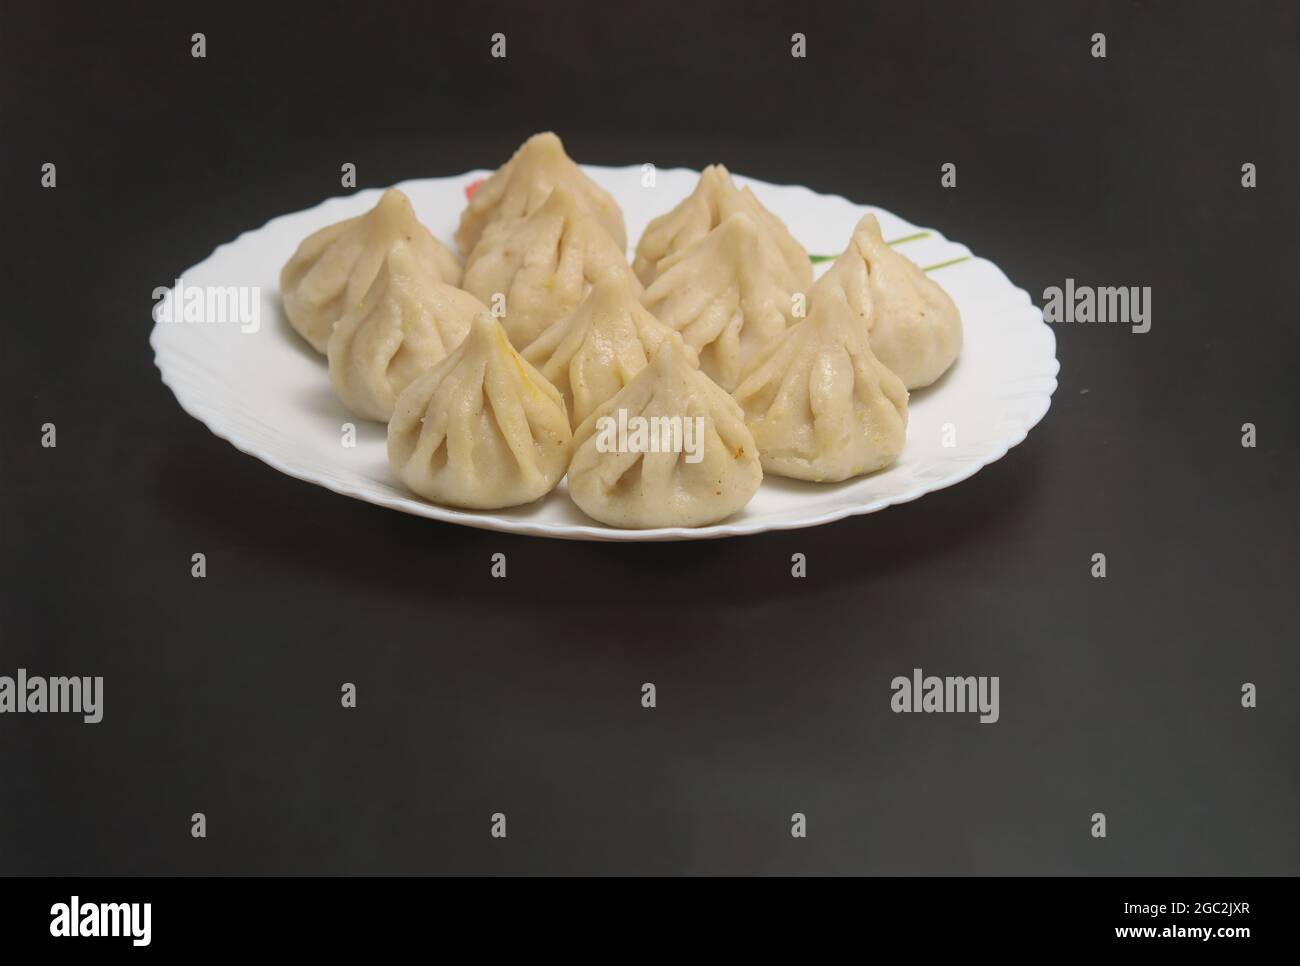 Steamed Modak, made from rice flour and coconut jaggery filling. Modak is a traditional Indian sweet made during Ganesh Utsav and also offered to lord Stock Photo